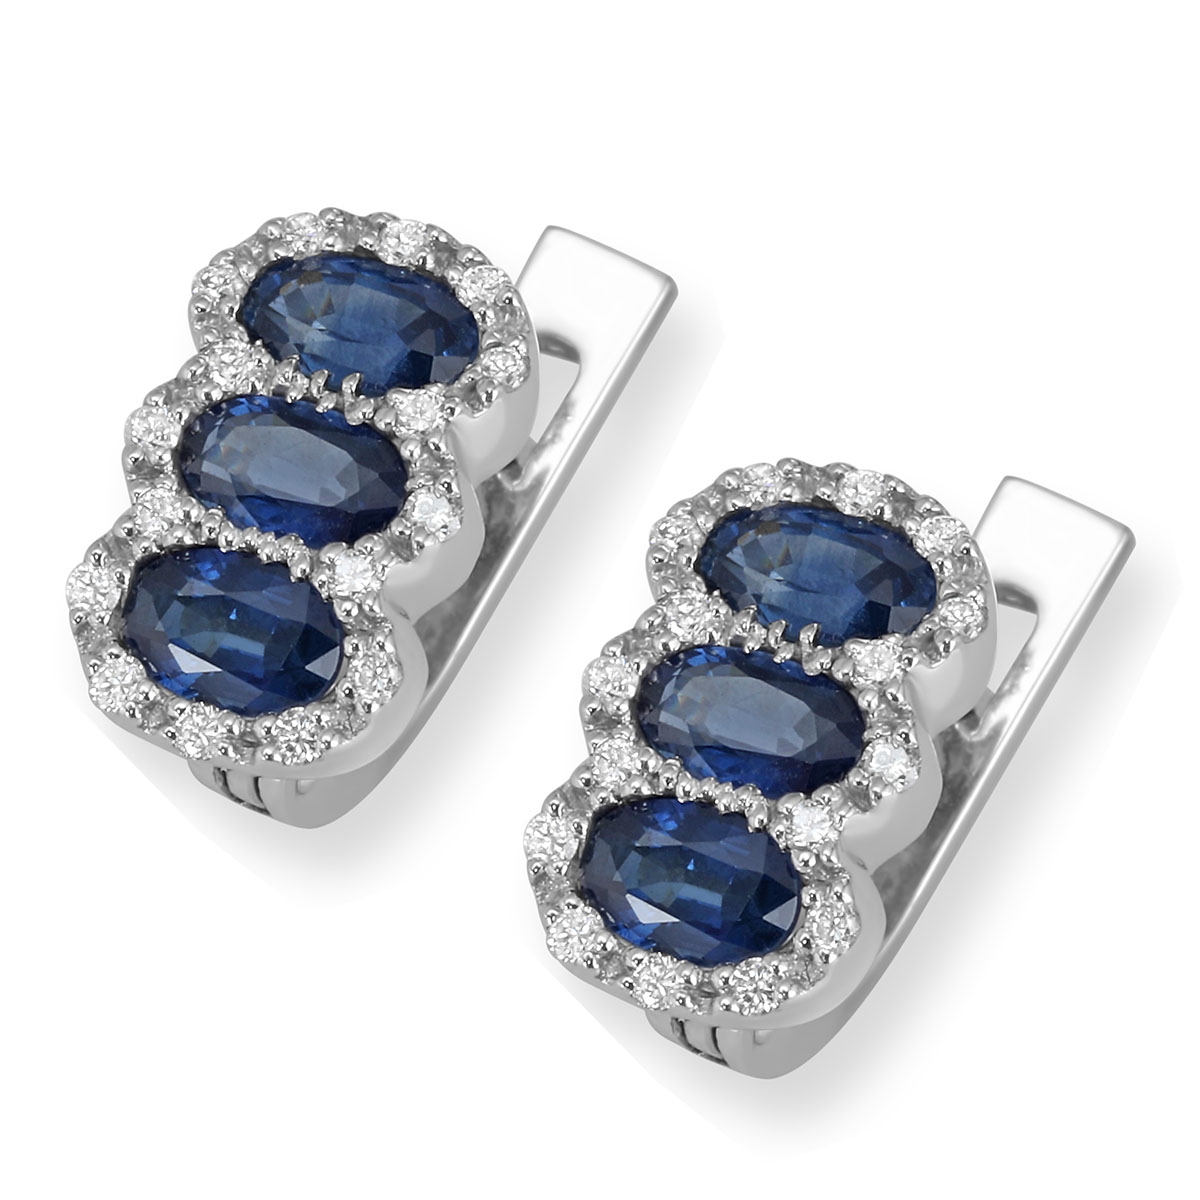 14K White Gold Diamond-Encrusted Earrings With Sapphires - 1